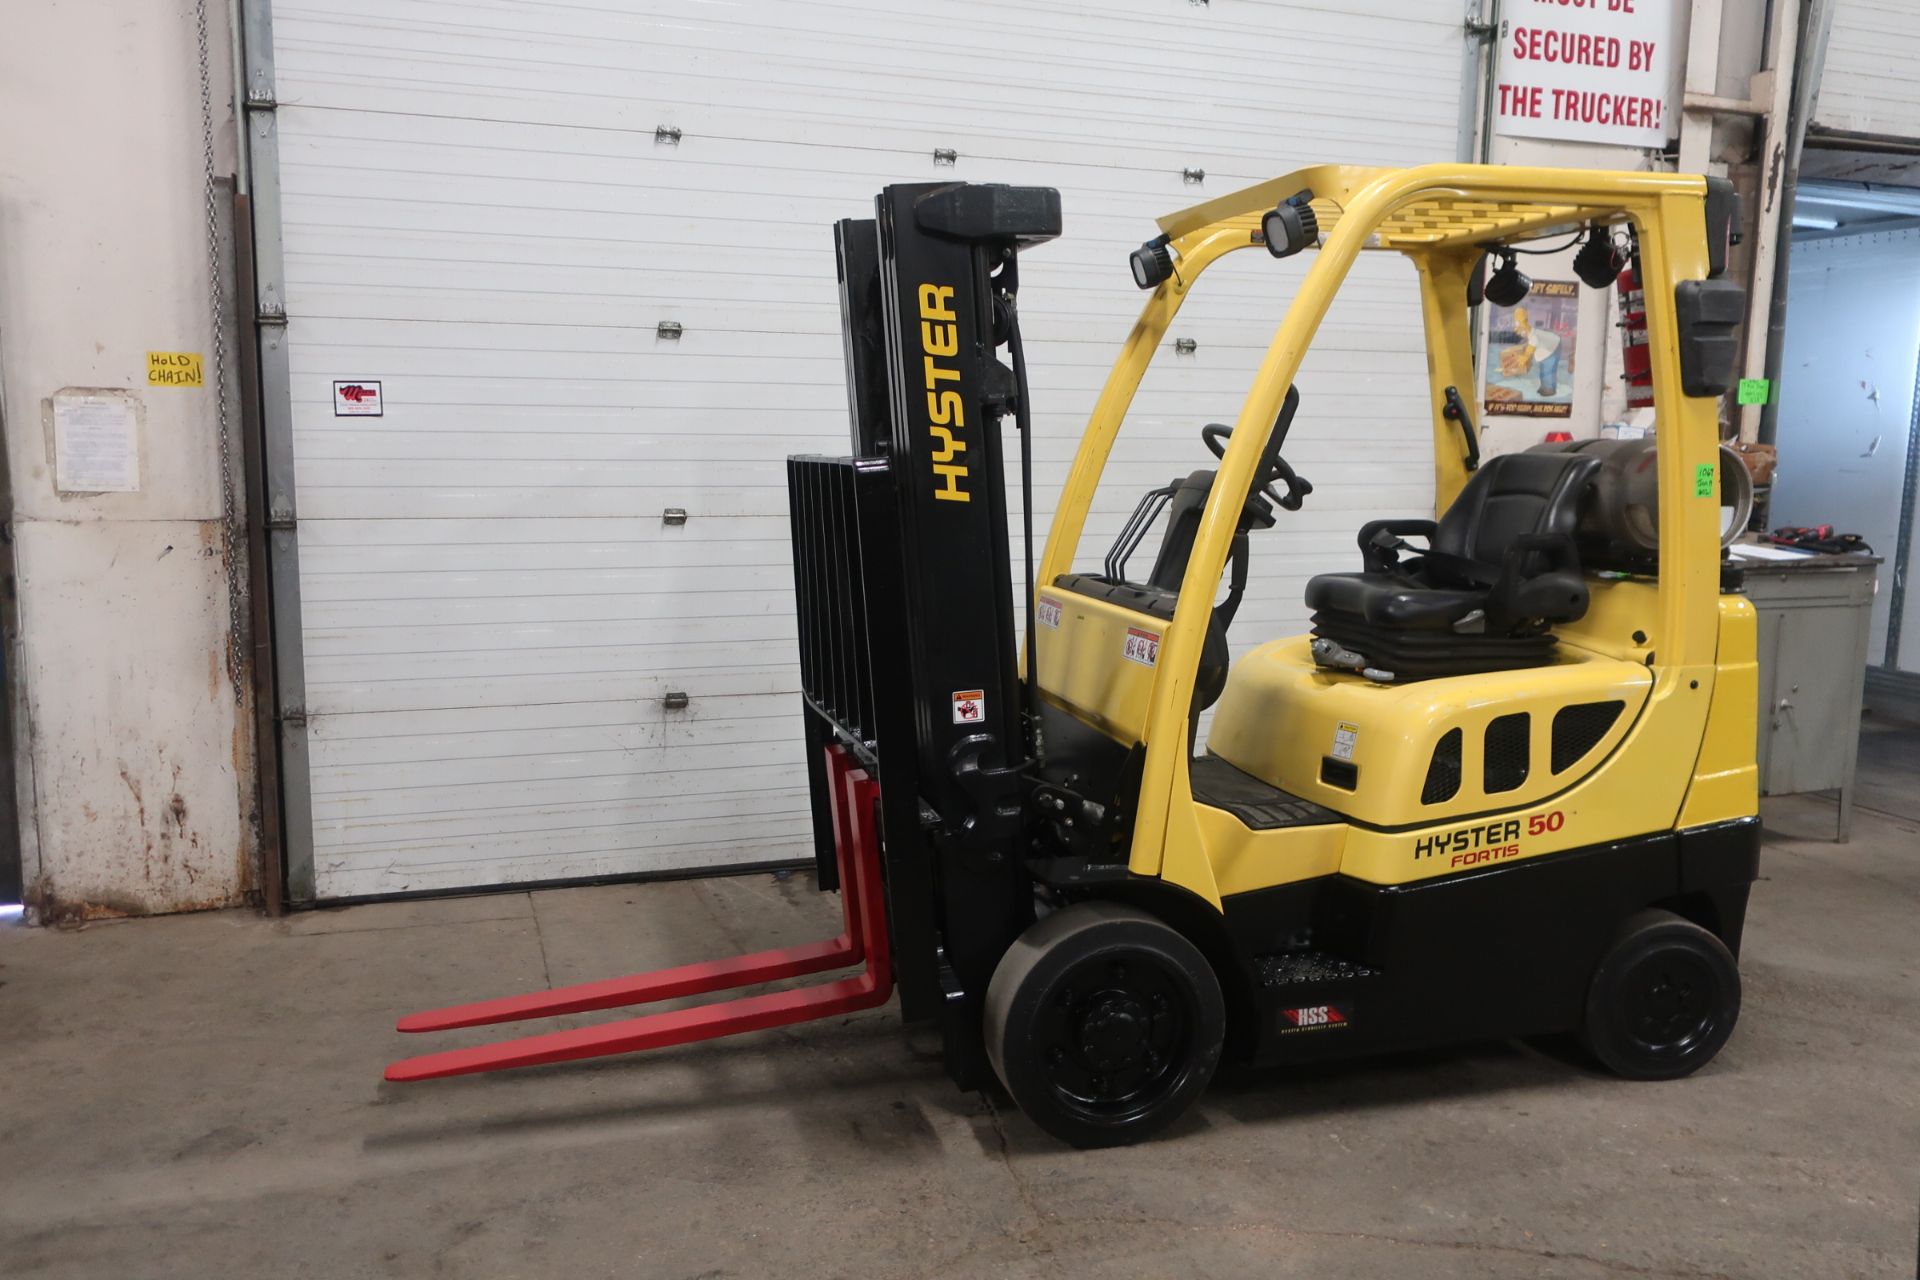 FREE CUSTOMS - Hyster 5000lbs capacity LPG (propane) Forklift with 3-stage mast and sideshift (no